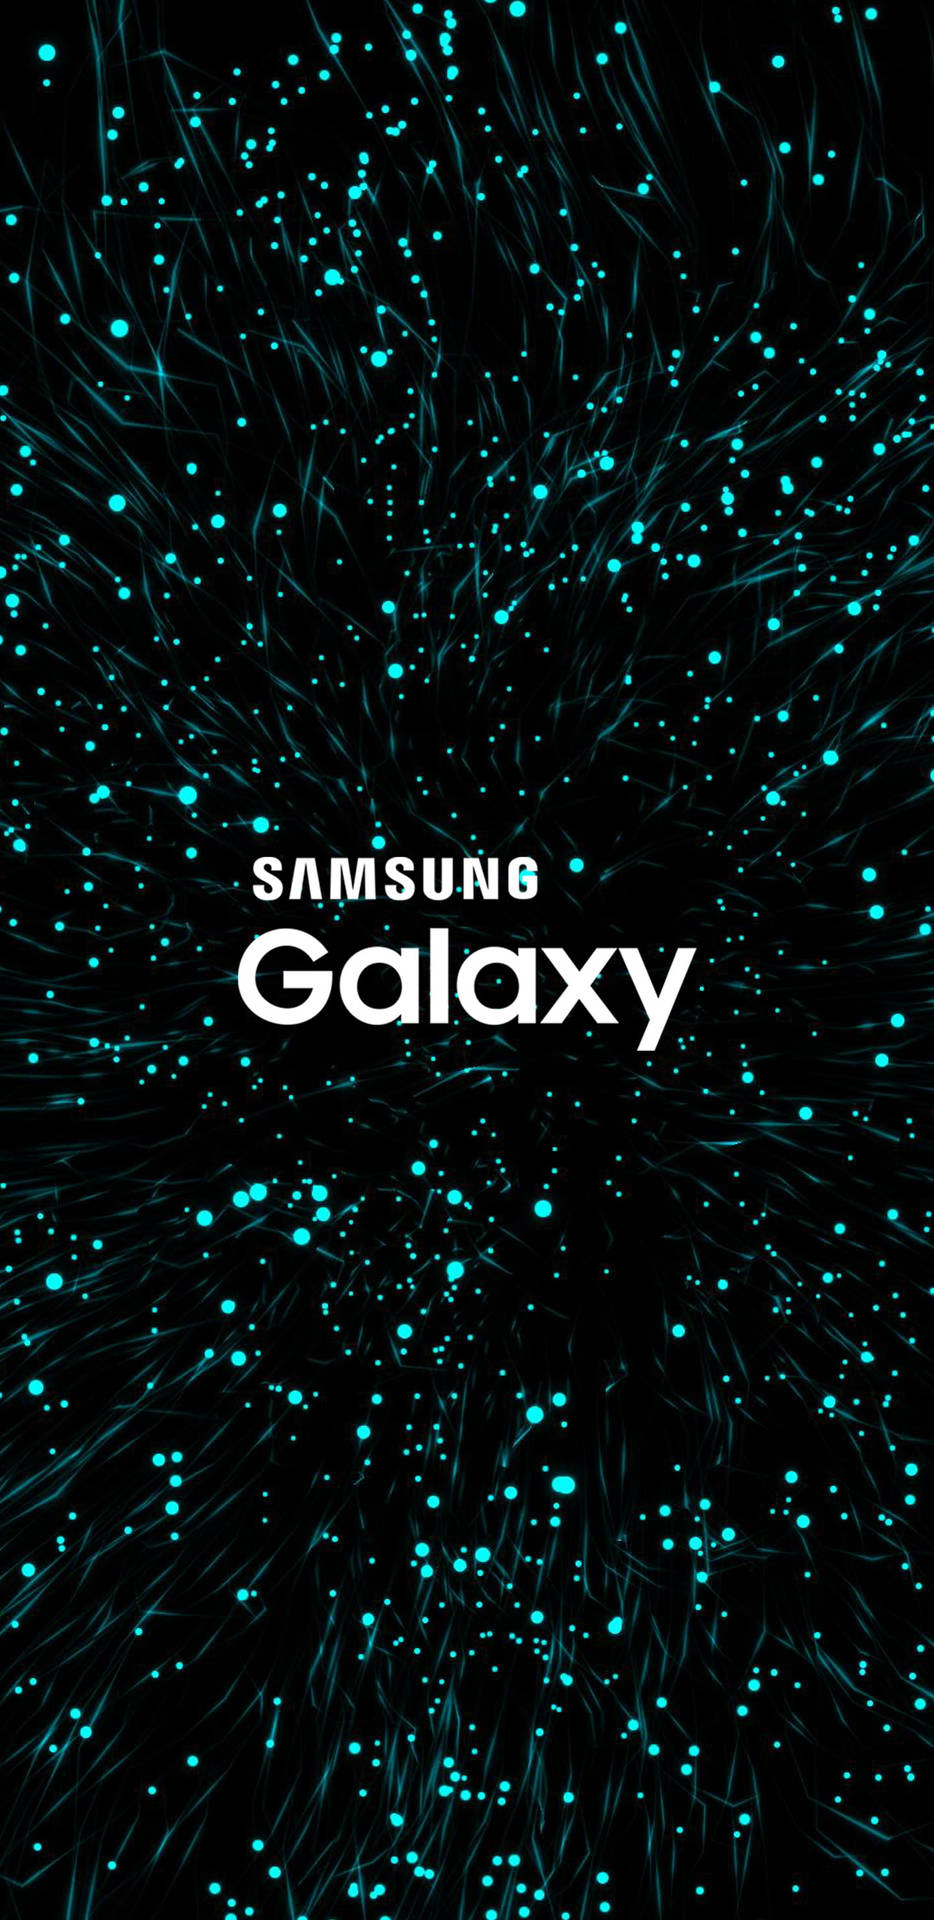 Samsung Galaxy Abstract Teal Lights Picture